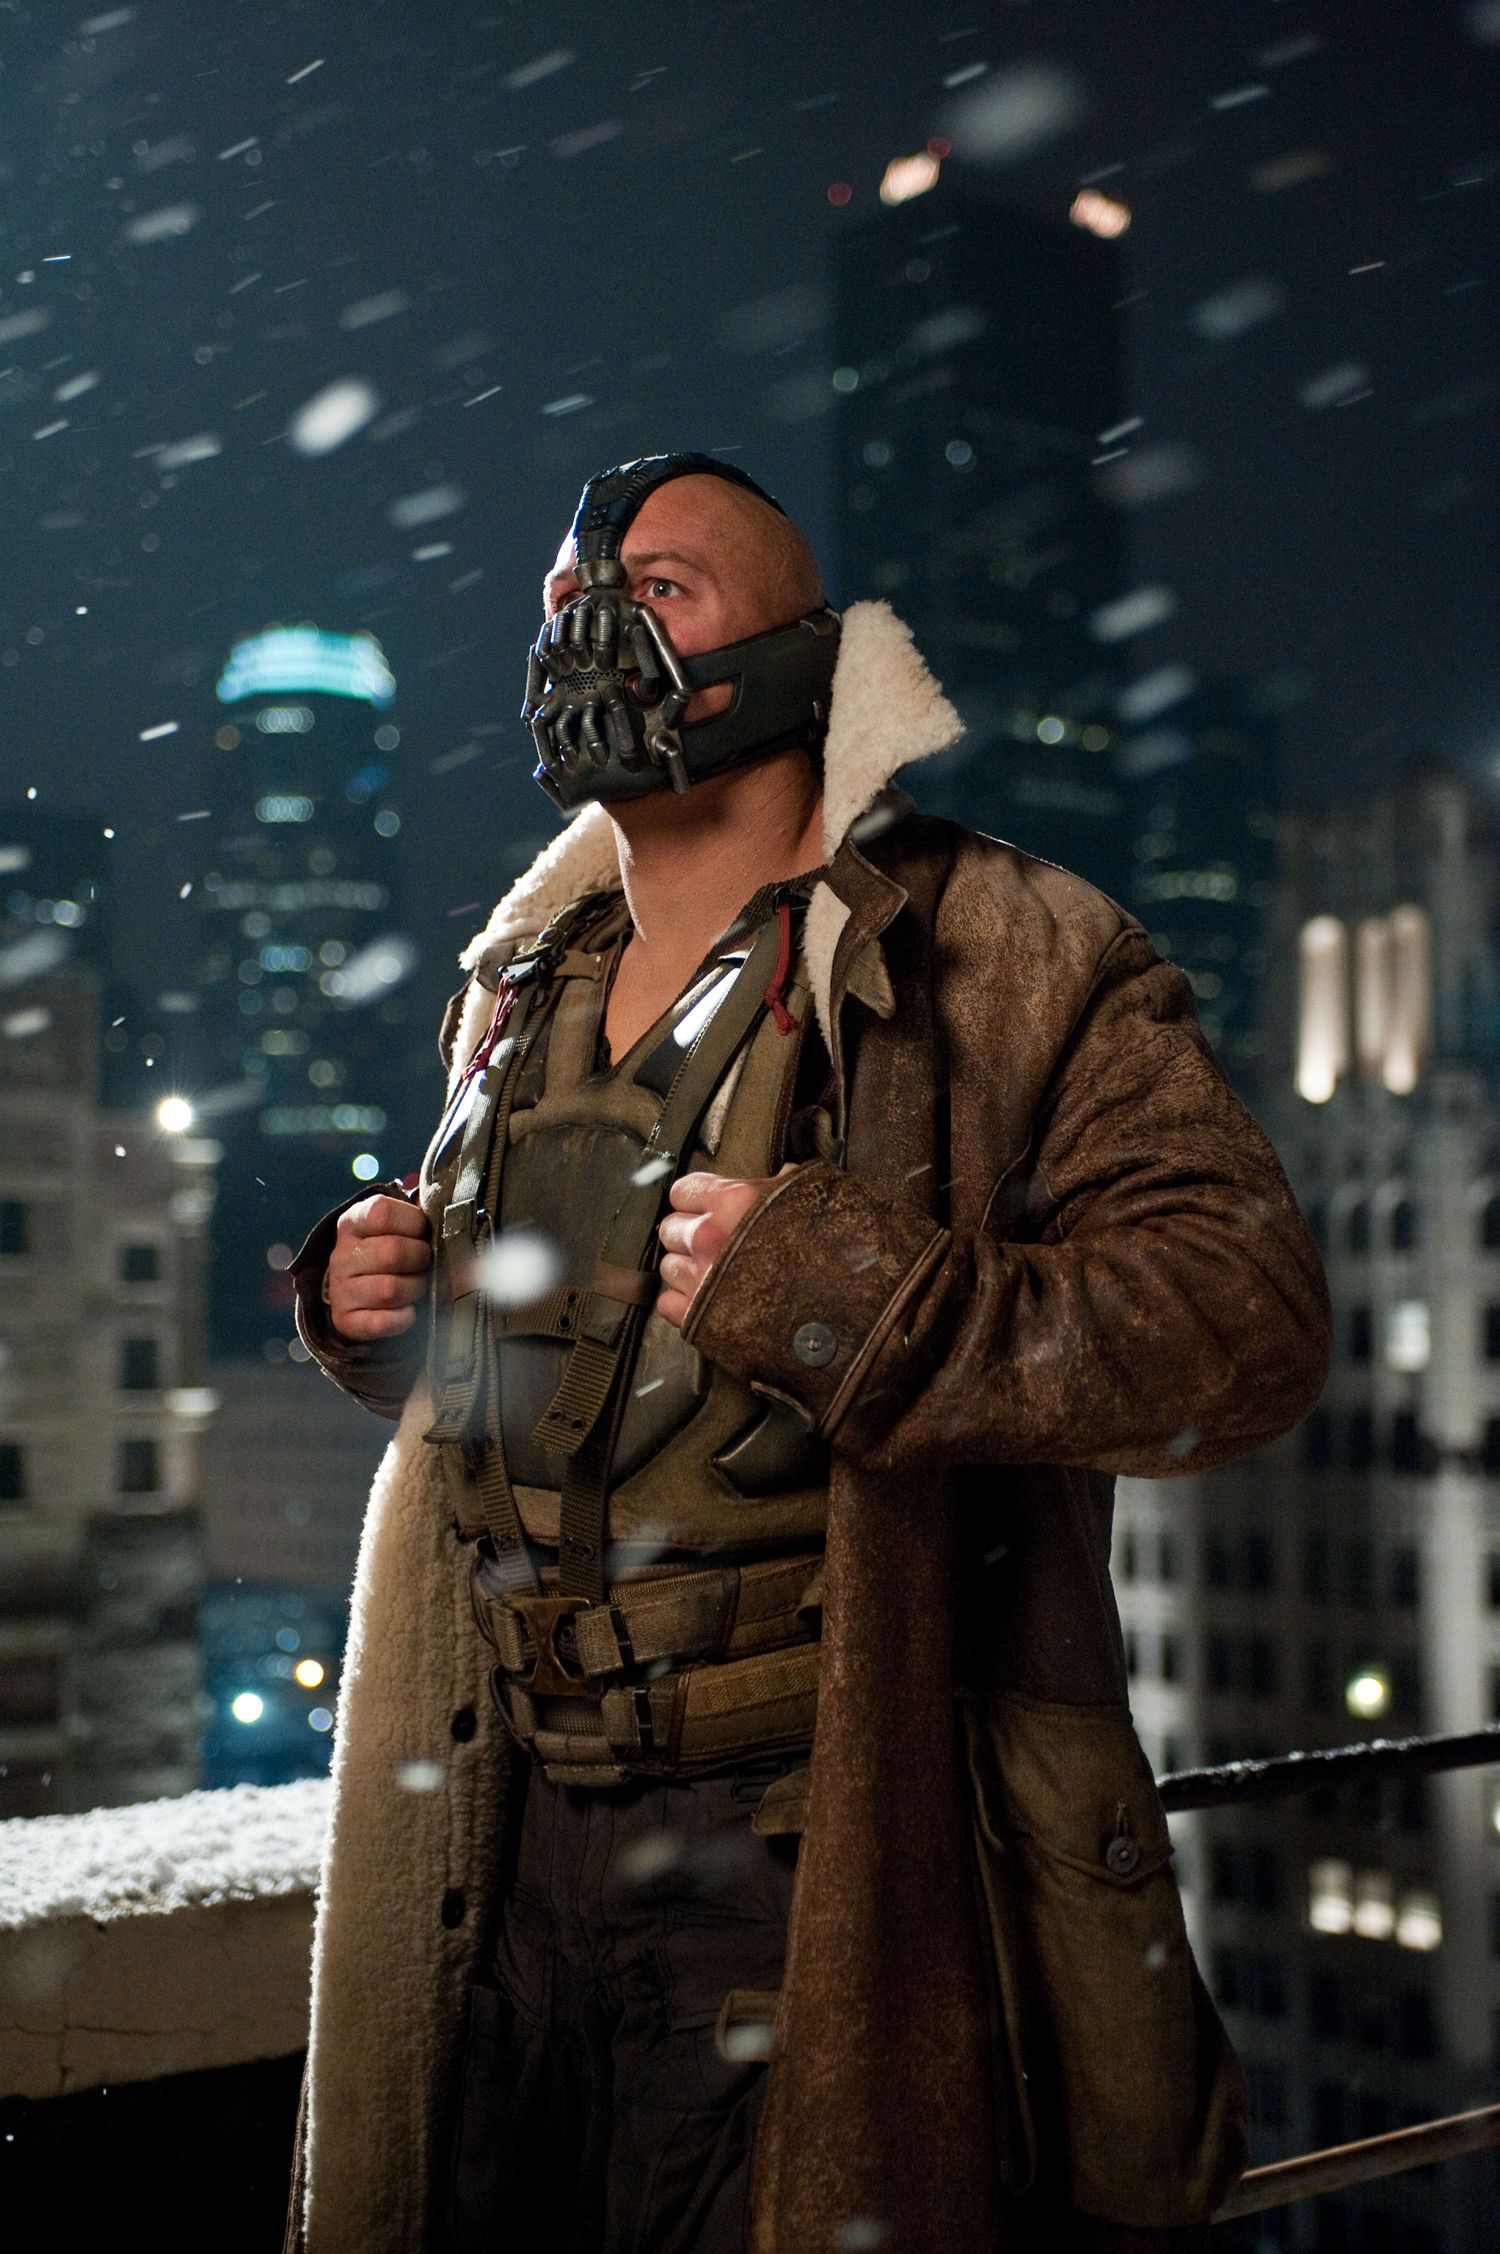 The Dark Knight Rises - Bane (Tom Hardy) on Snowy Rooftop in Gotham